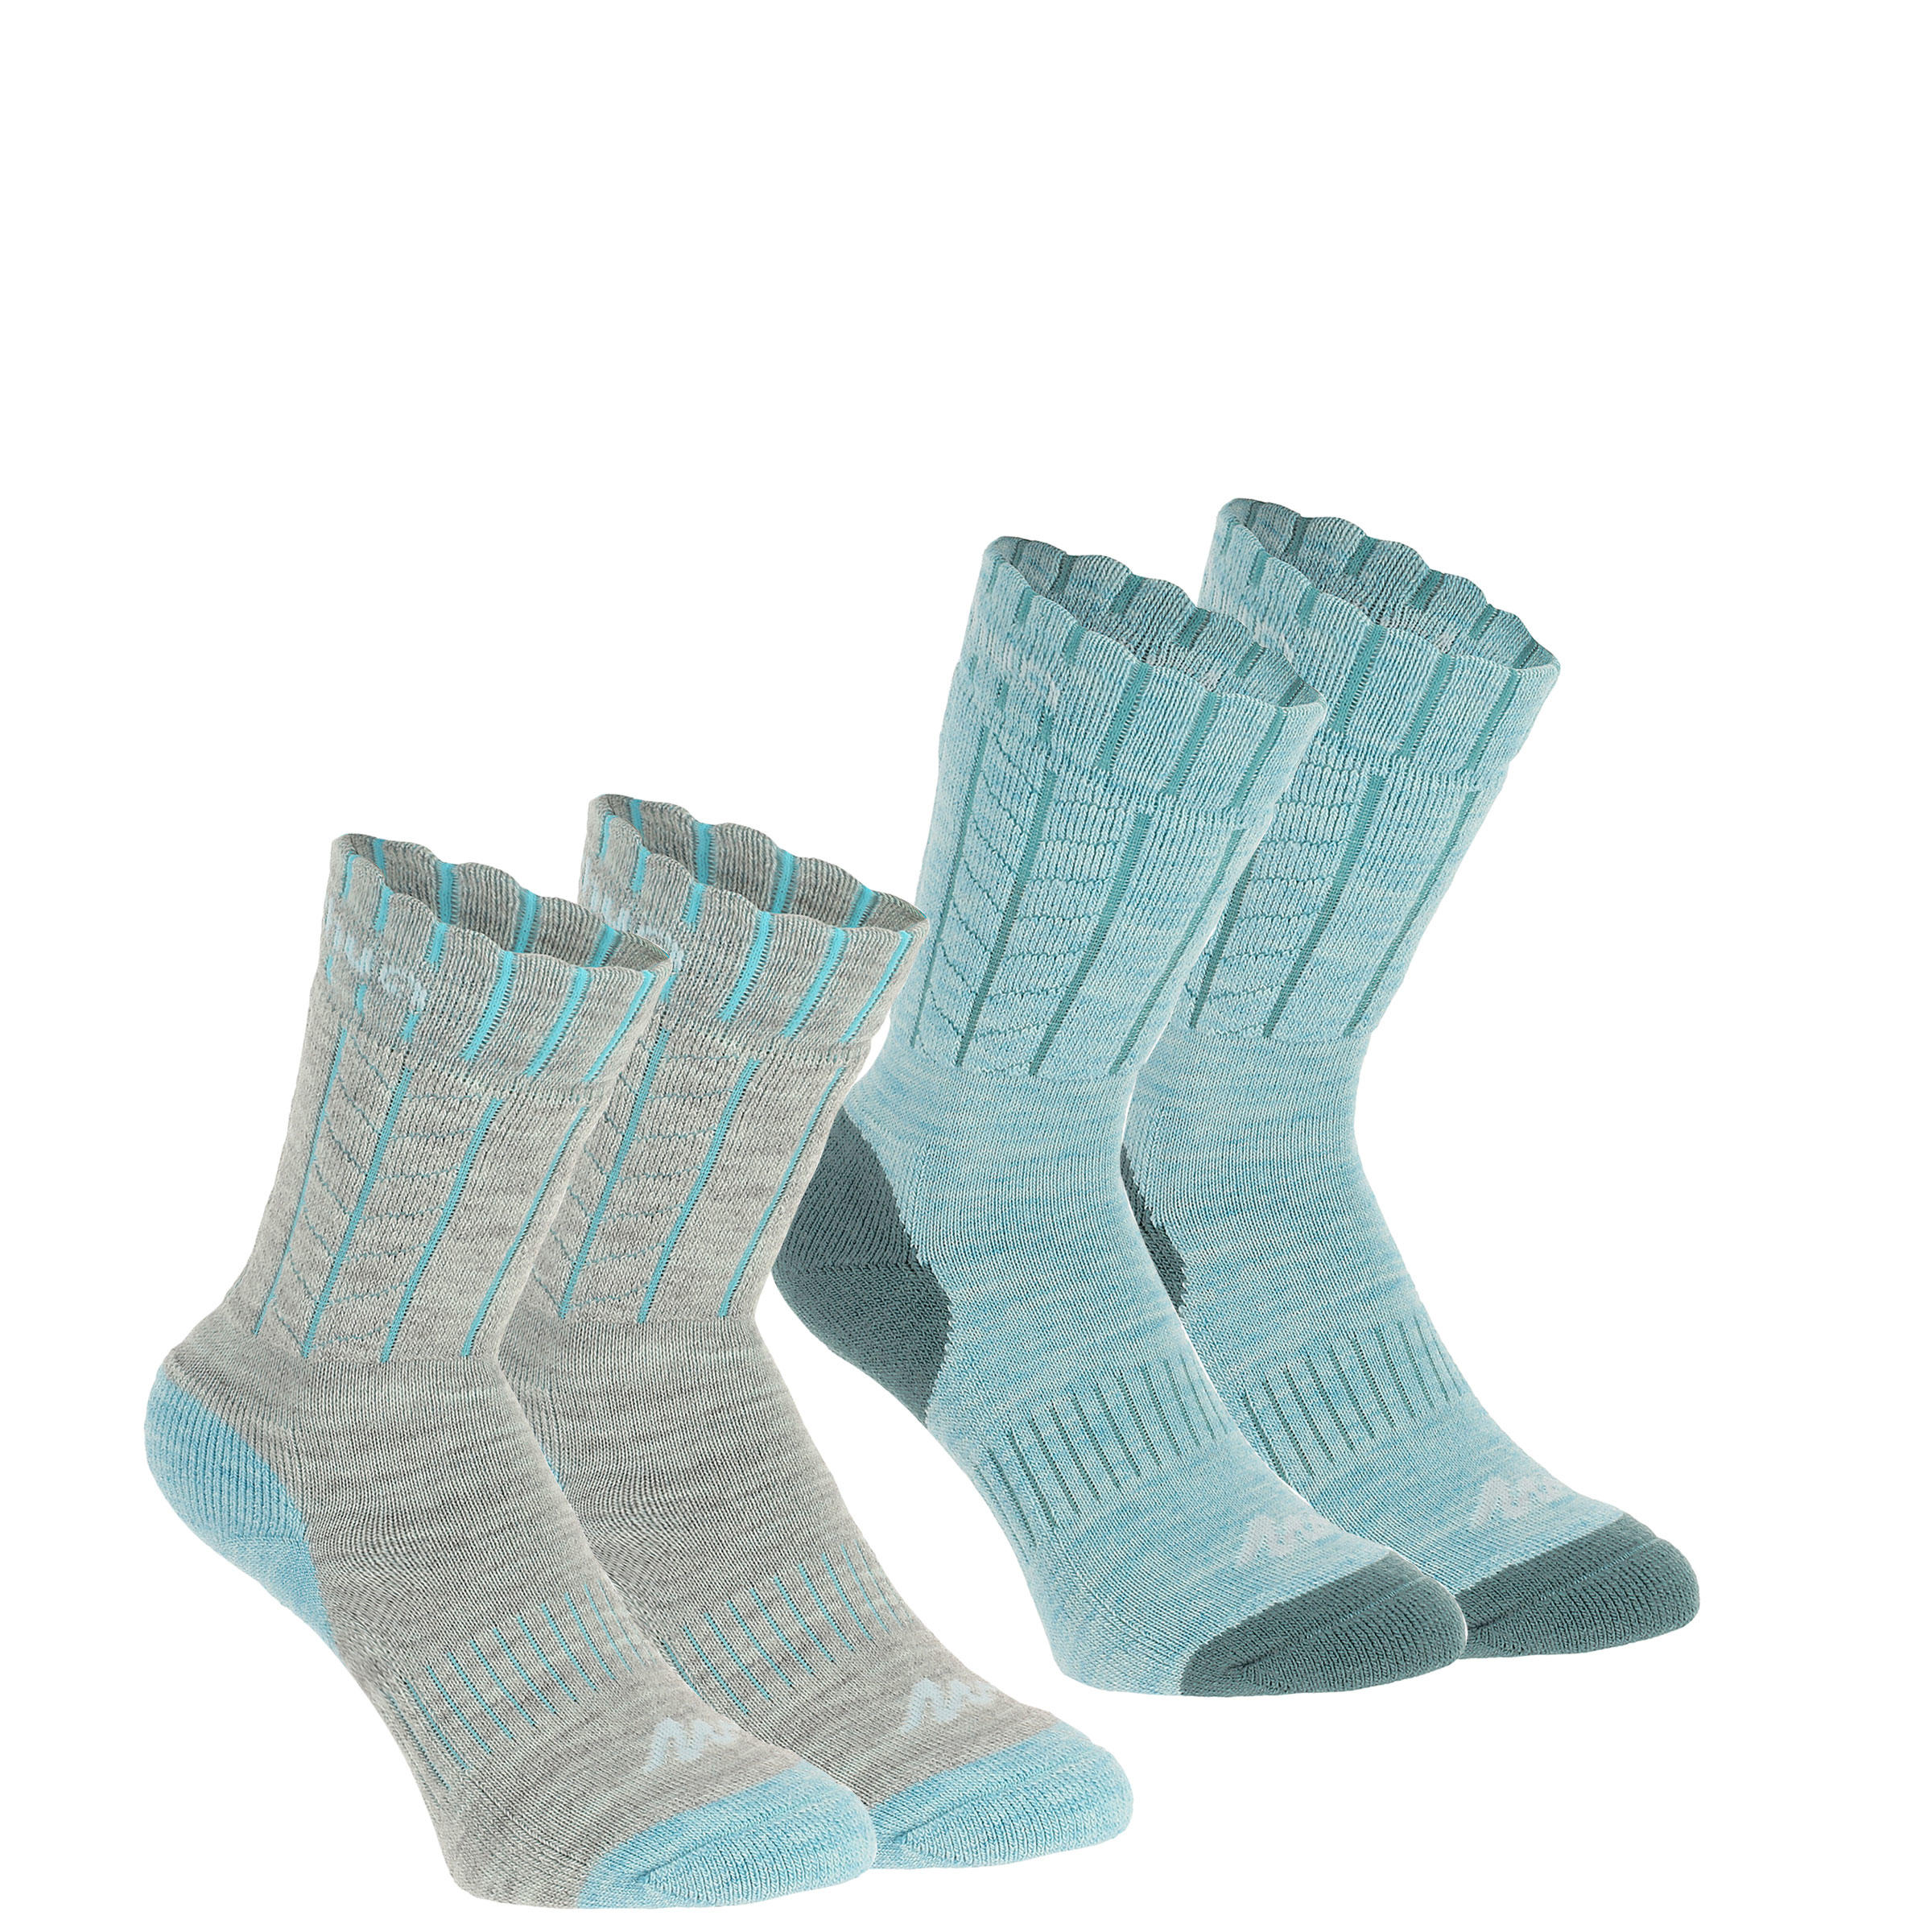 QUECHUA 2 pairs of Arpenaz warm winter hiking socks in grey/blue and blue.